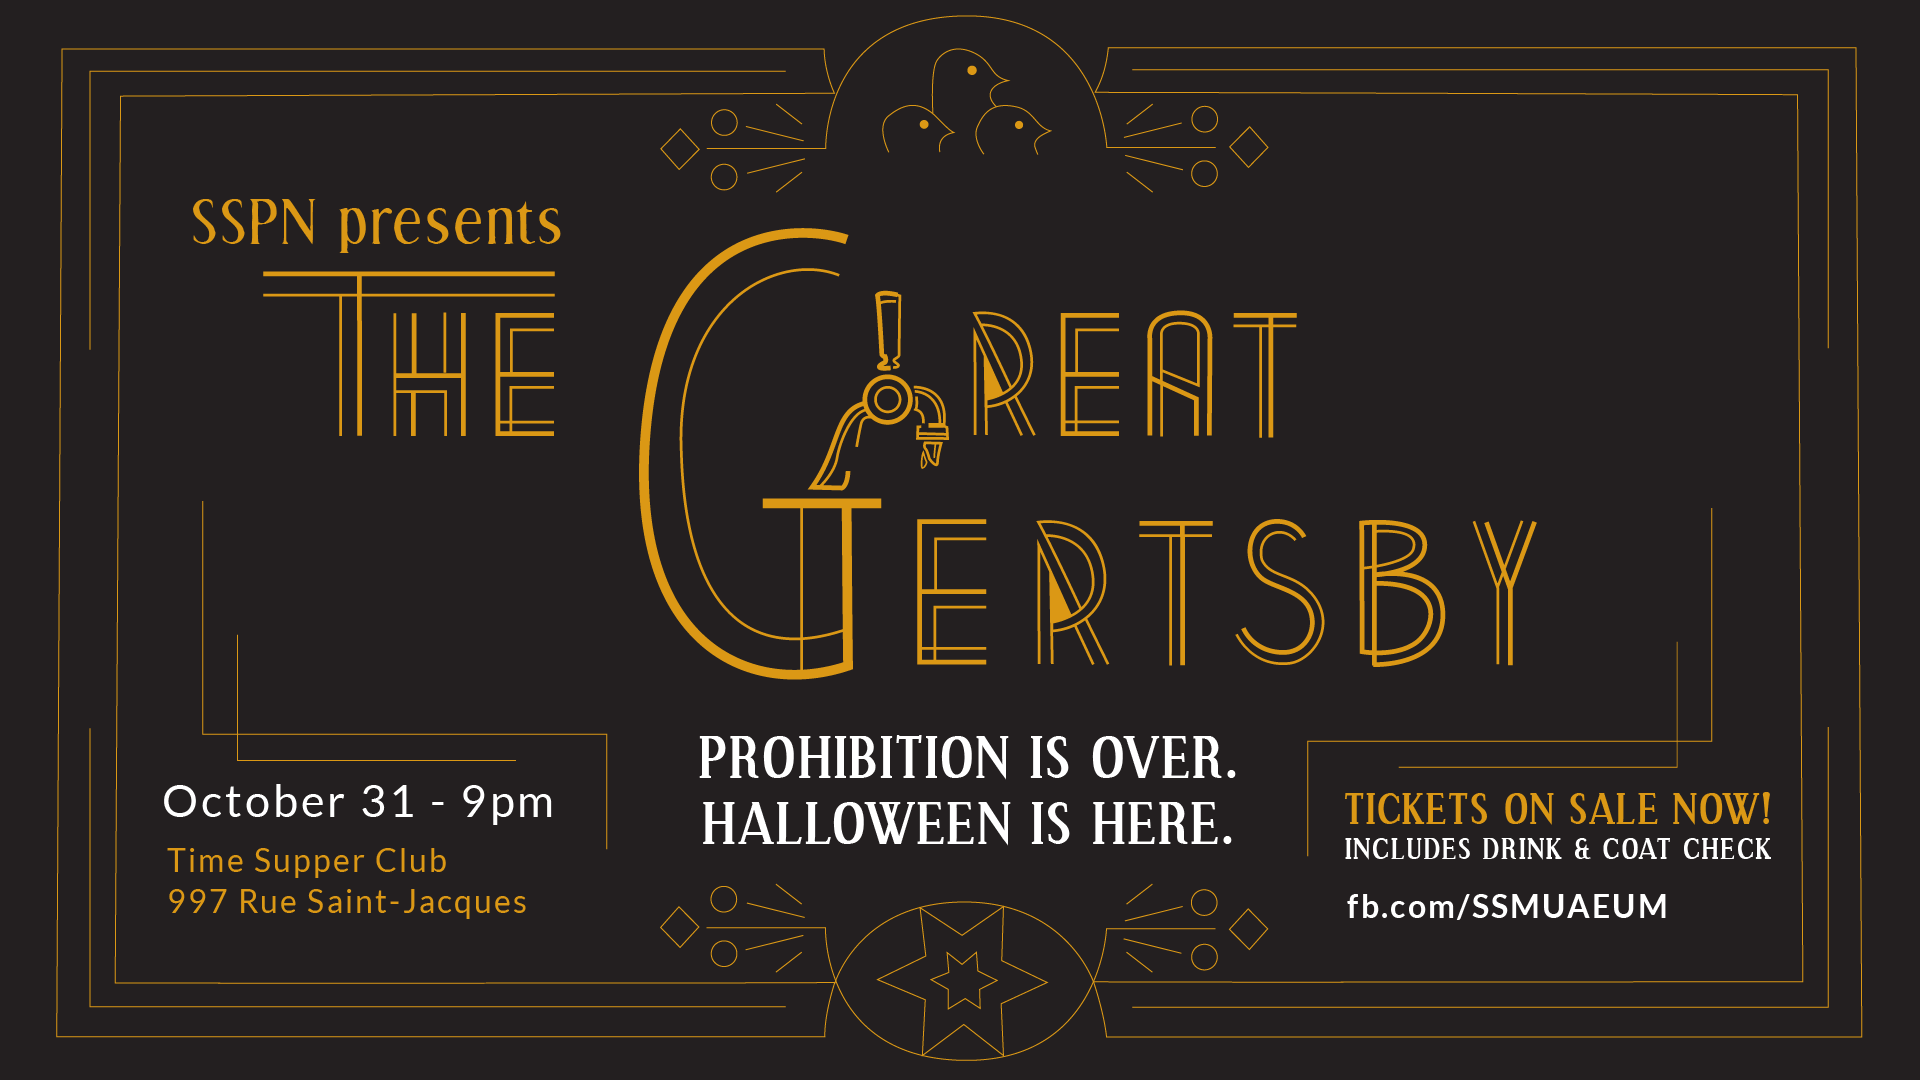 The Great Gertsby Halloween Party